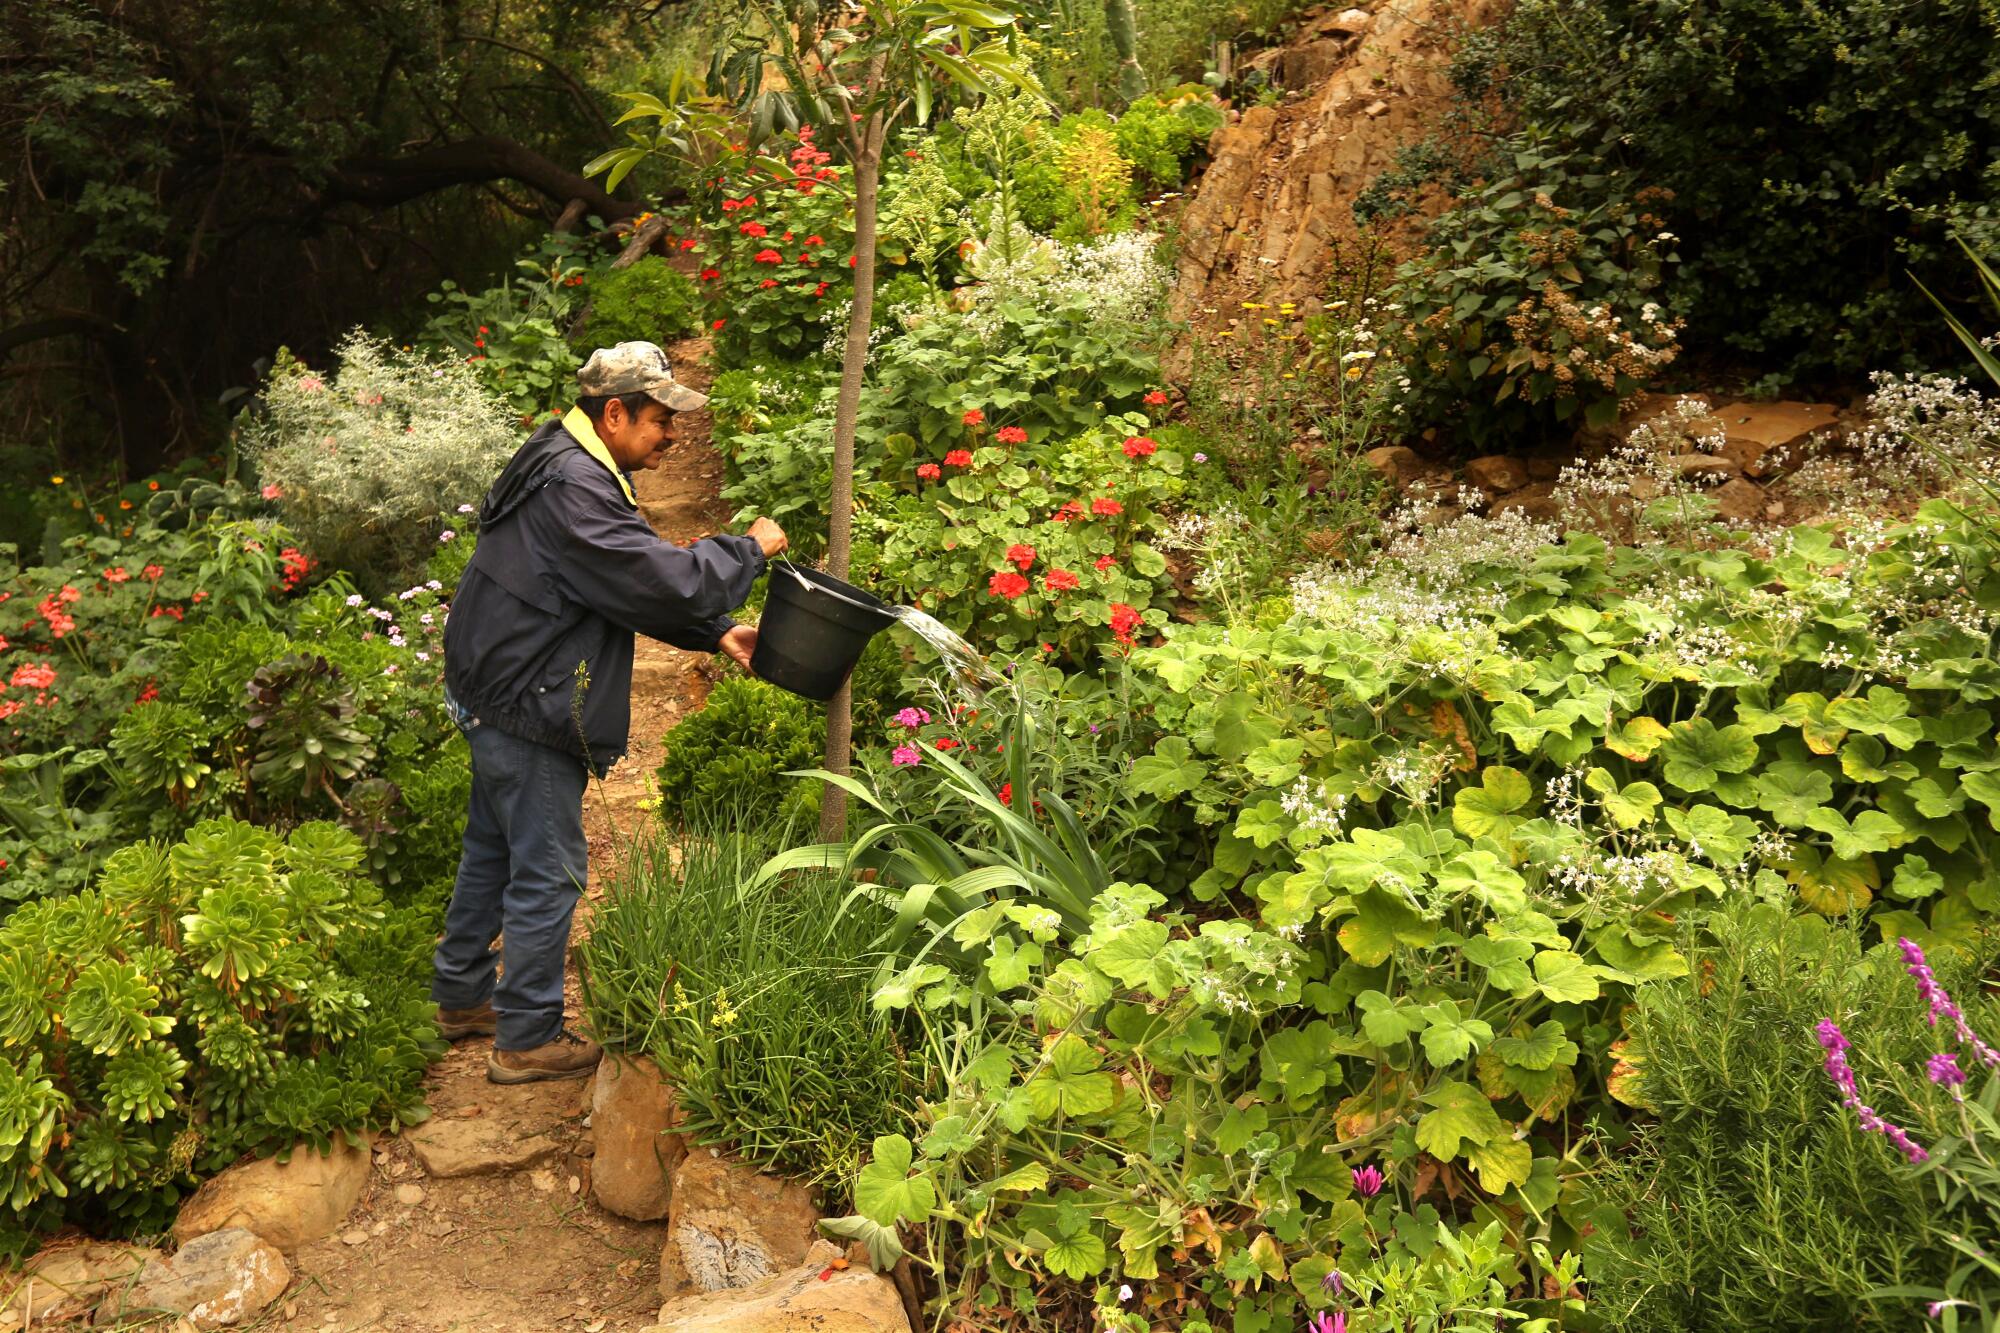 A man in a baseball cap and jacket waters plants outdoors.